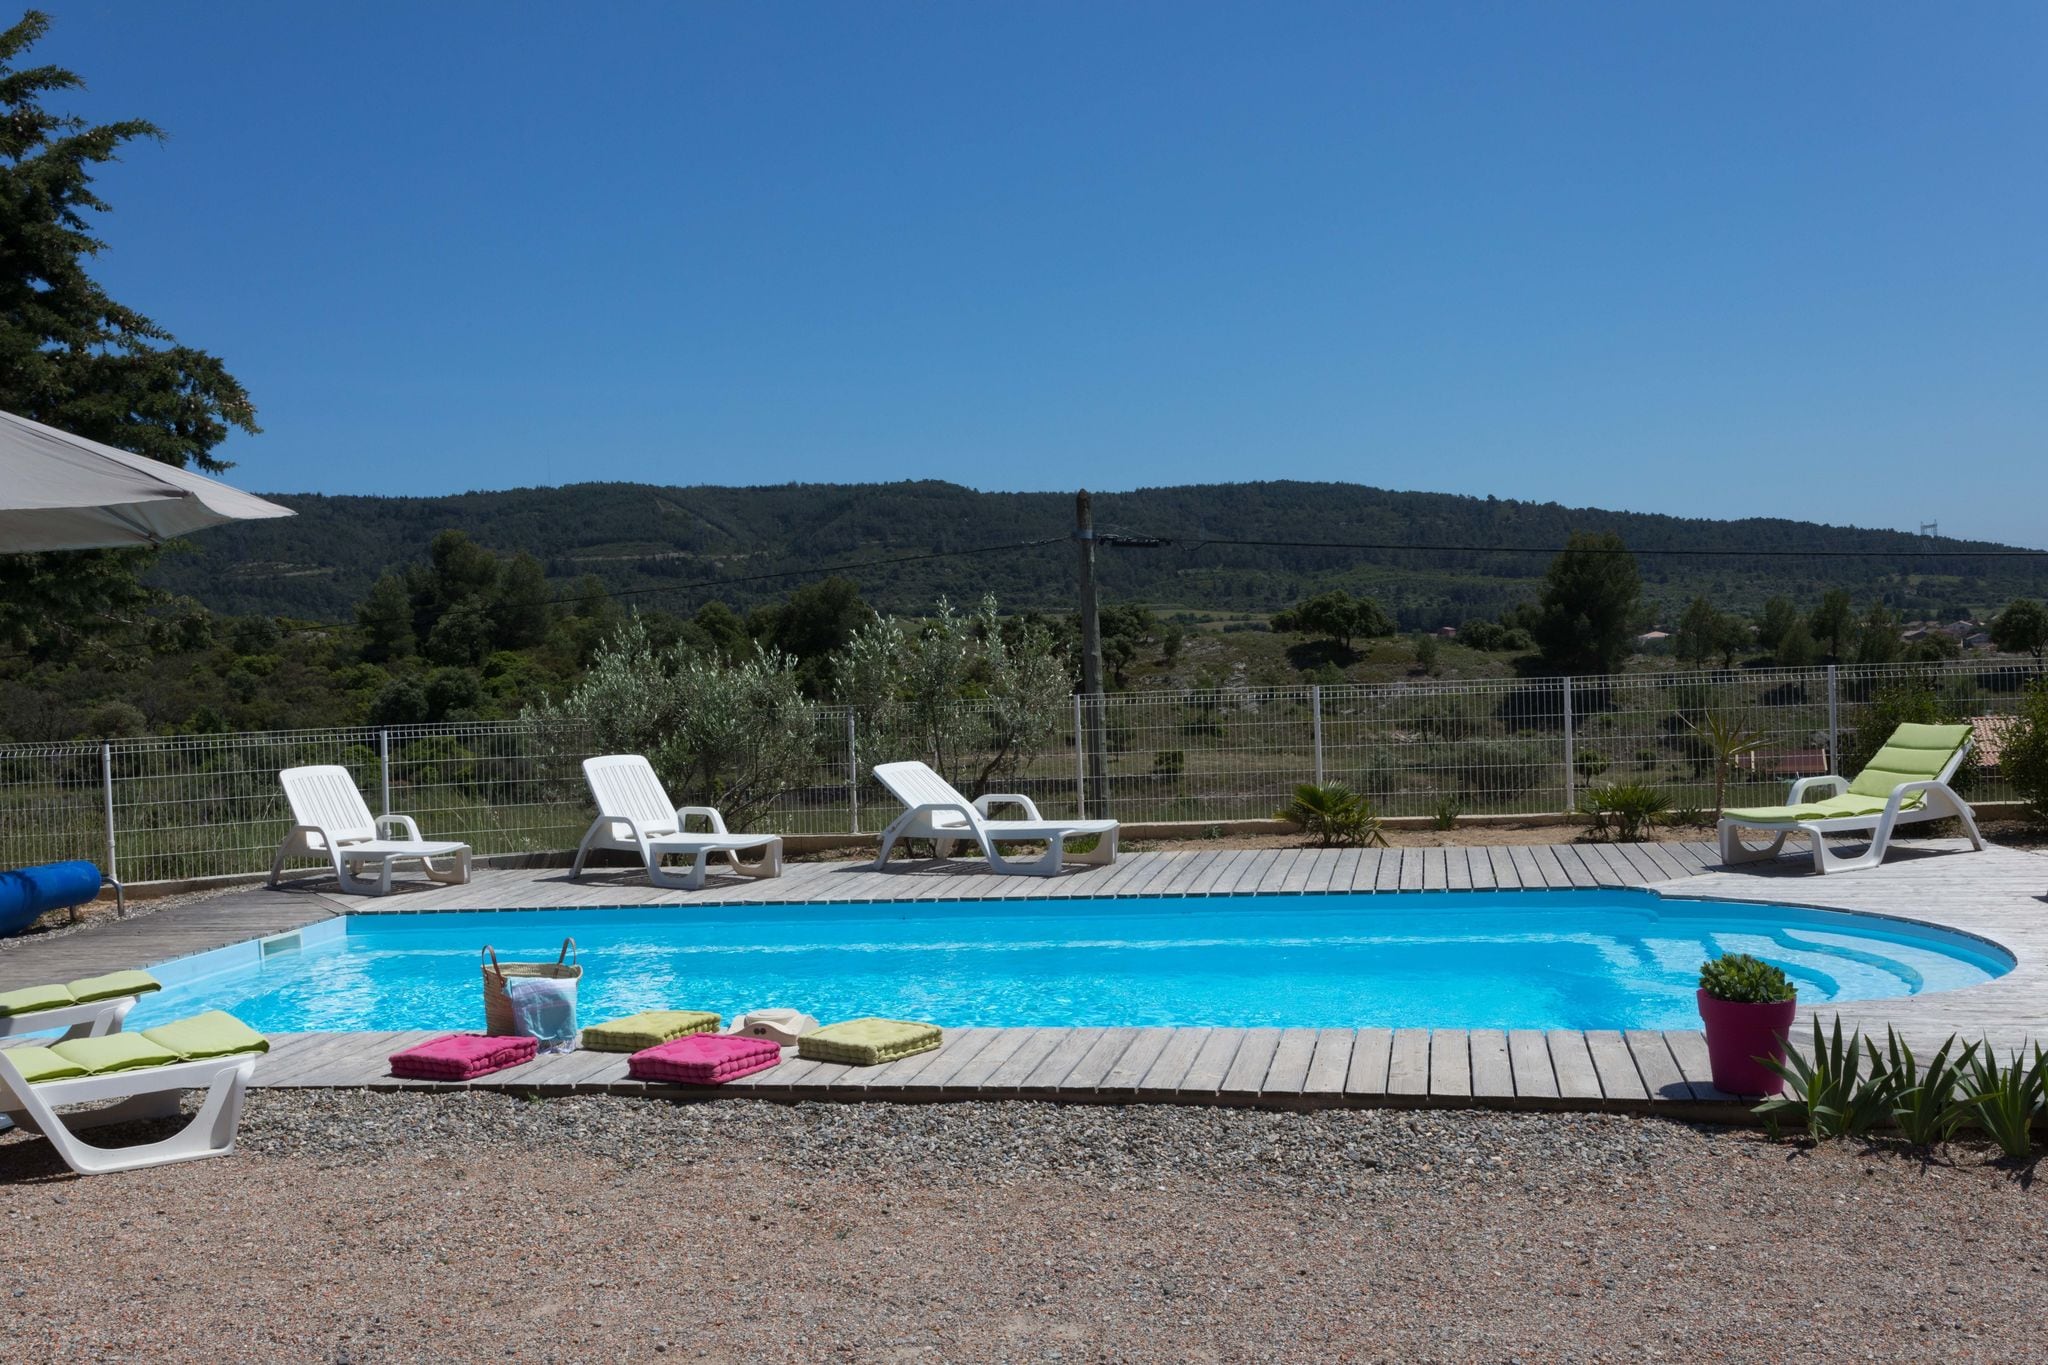 Spacious villa, plenty of privacy, private swimming pool surrounded by vineyards